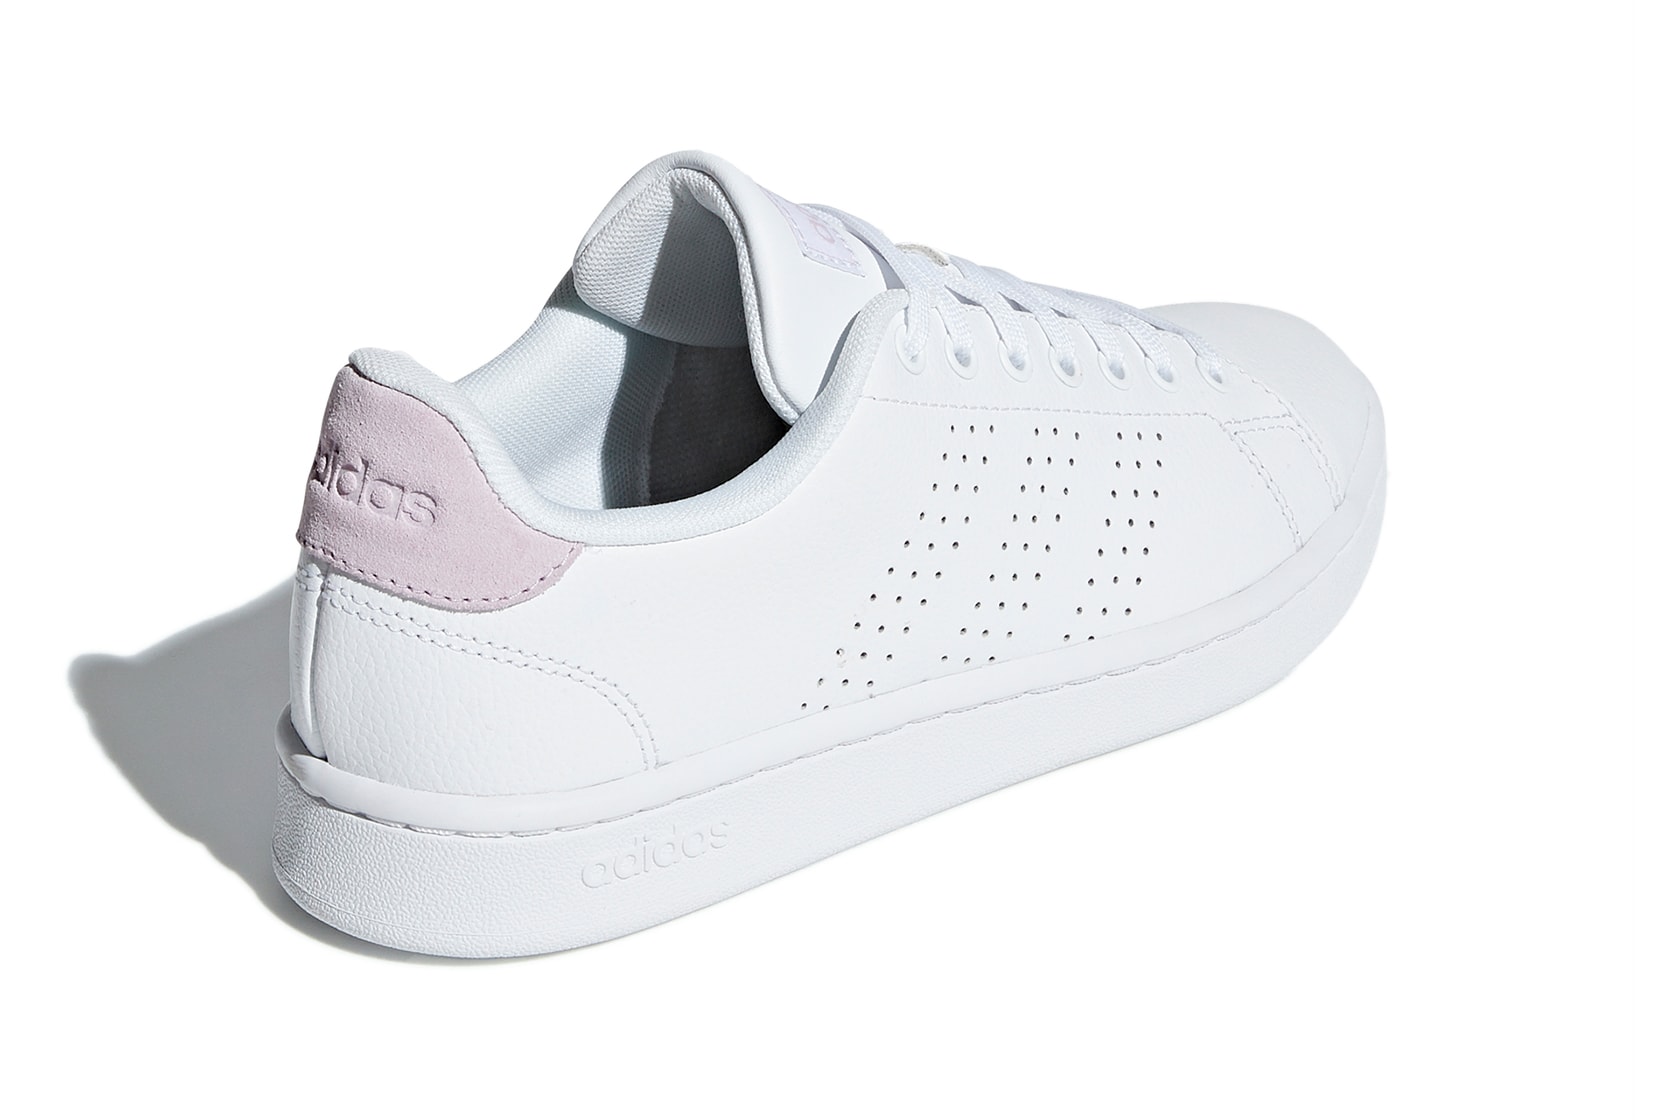 adidas New Advantage Shoe Is Cloud White and Pink | Hypebae